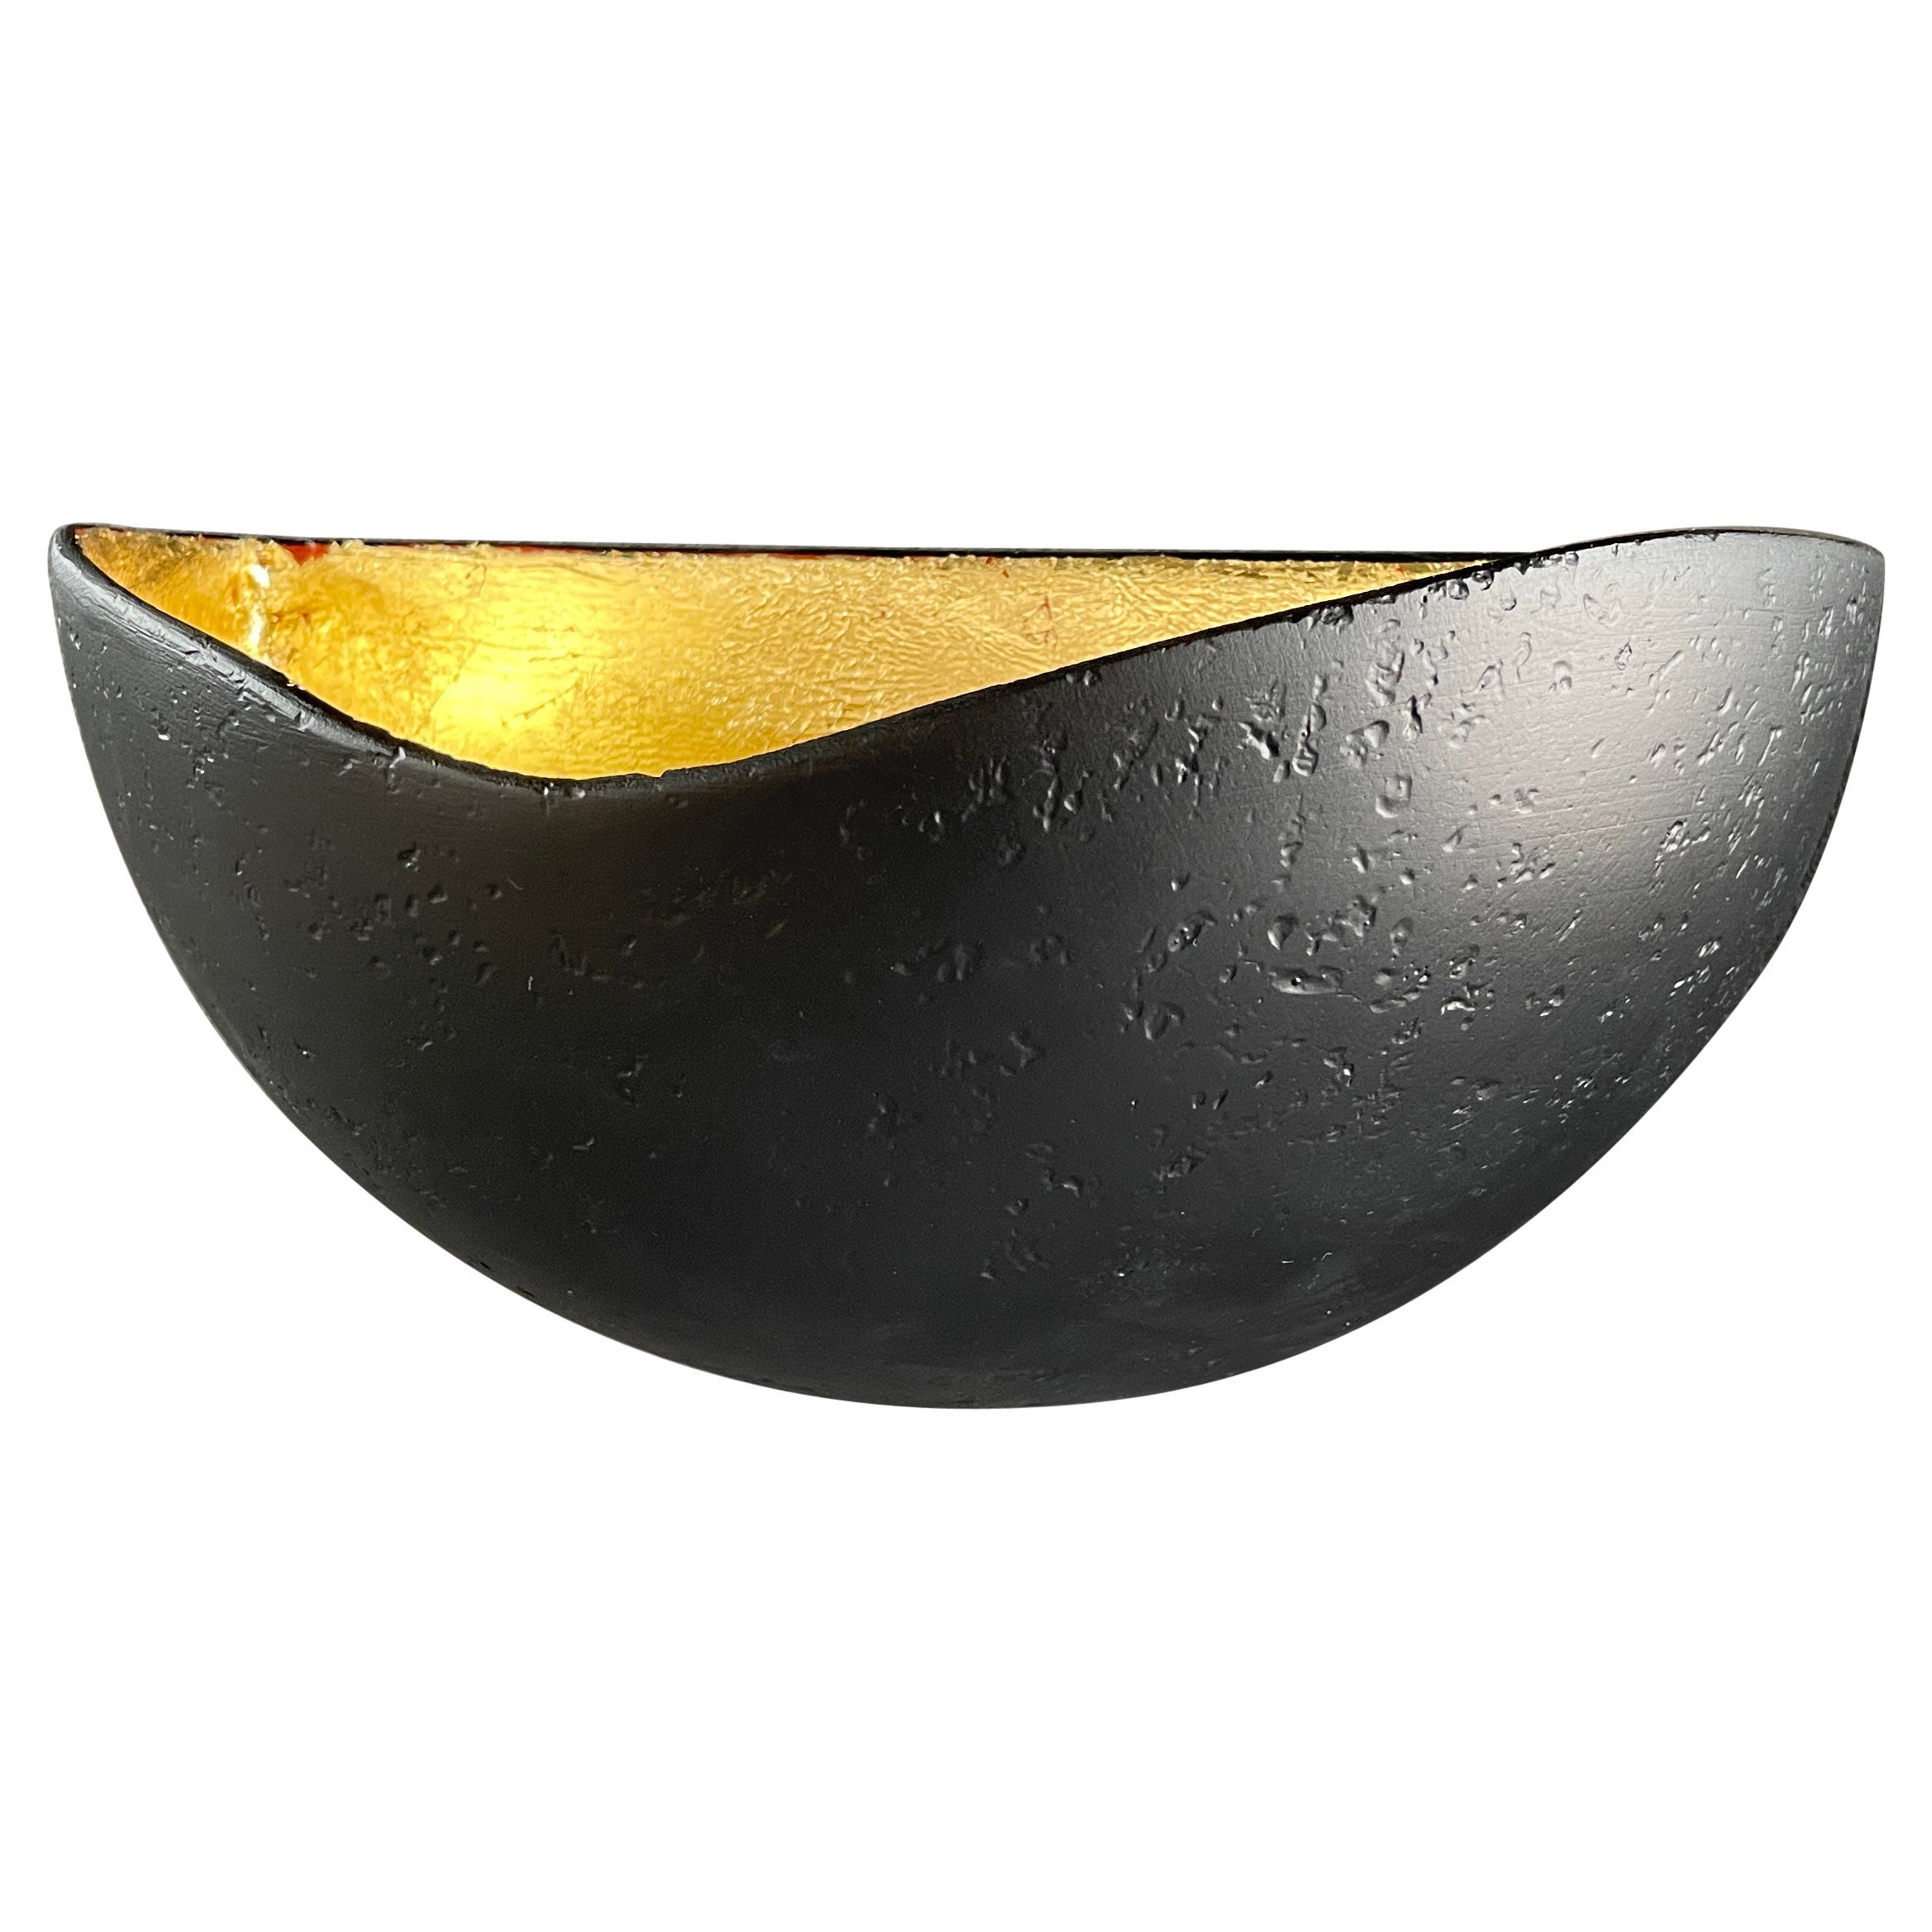 St Germain Sconce, Matte Black with Gold Leaf, by Bourgeois Boheme Atelier  For Sale at 1stDibs